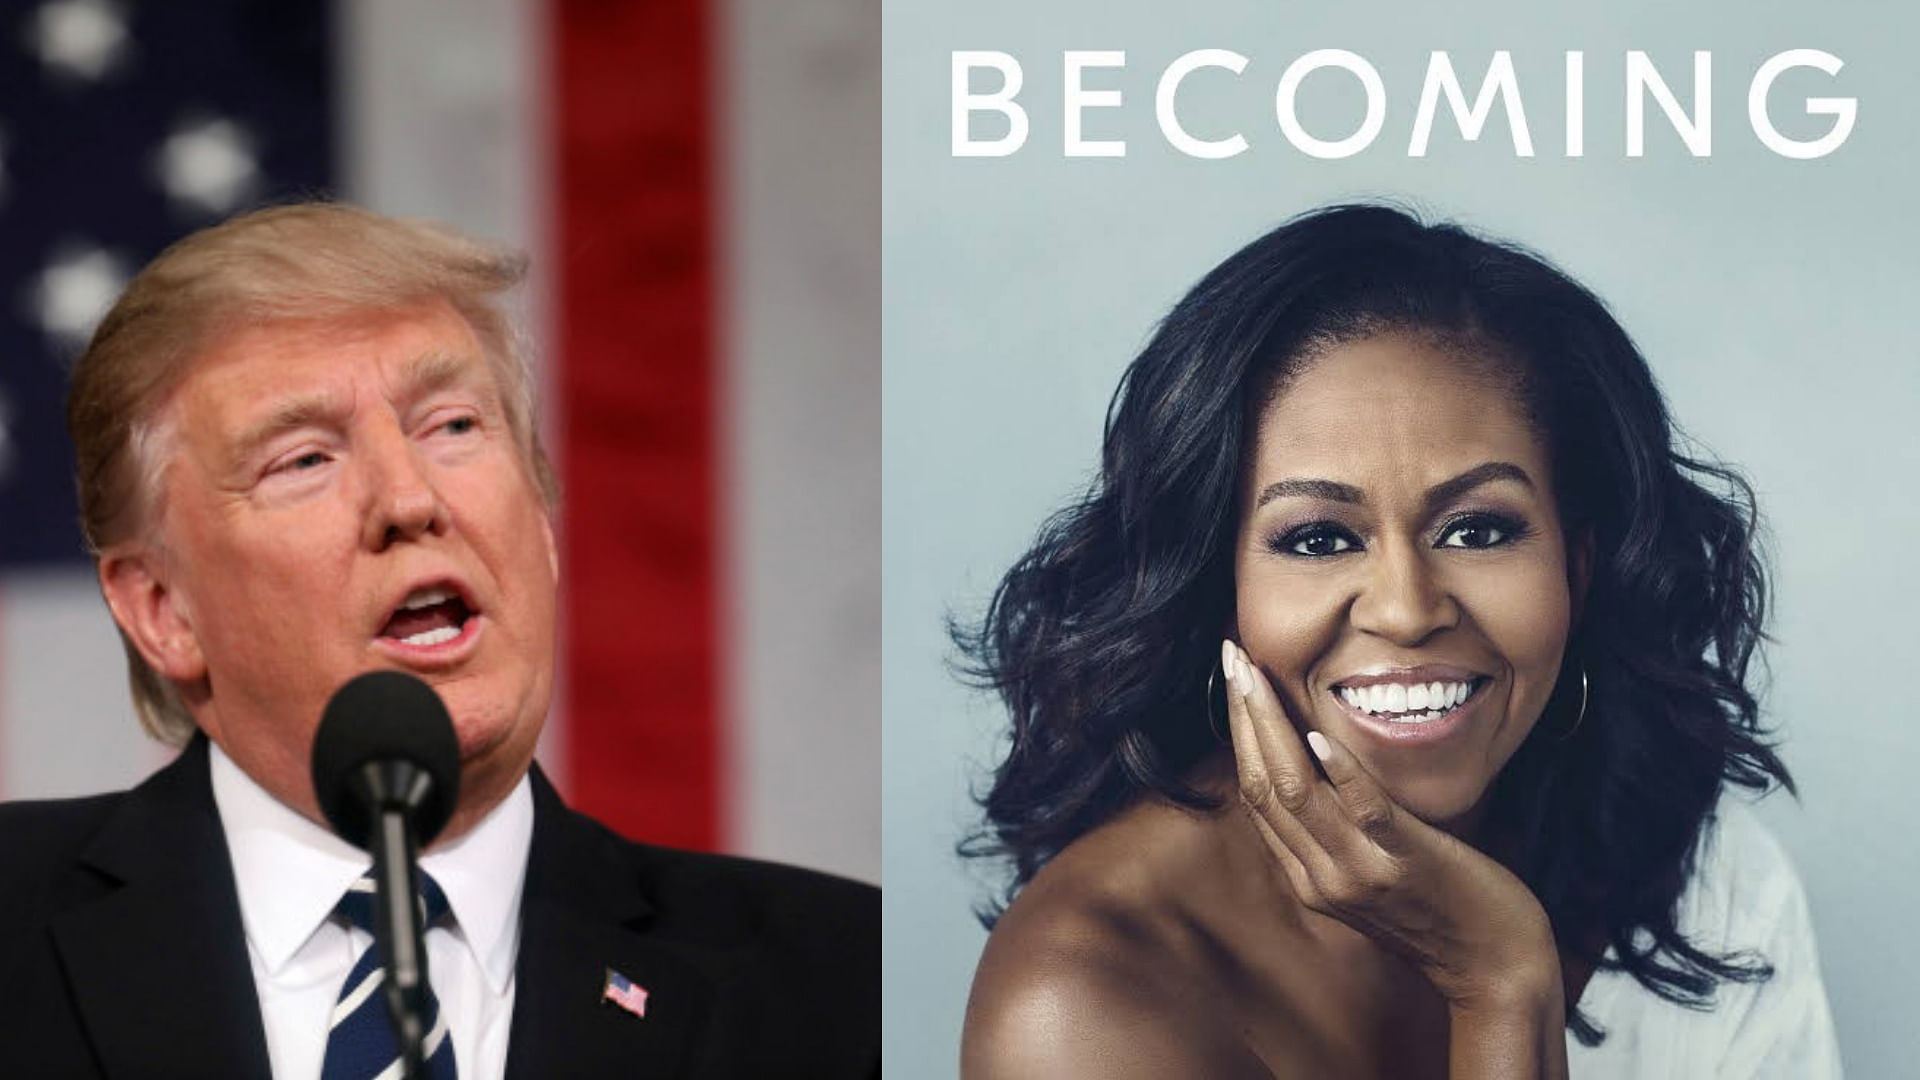 Former first lady Michelle Obama blasts President Donald Trump in her new book, writing how she reacted in shock the night she learned he would replace her husband in the Oval Office and tried to “block it all out.”